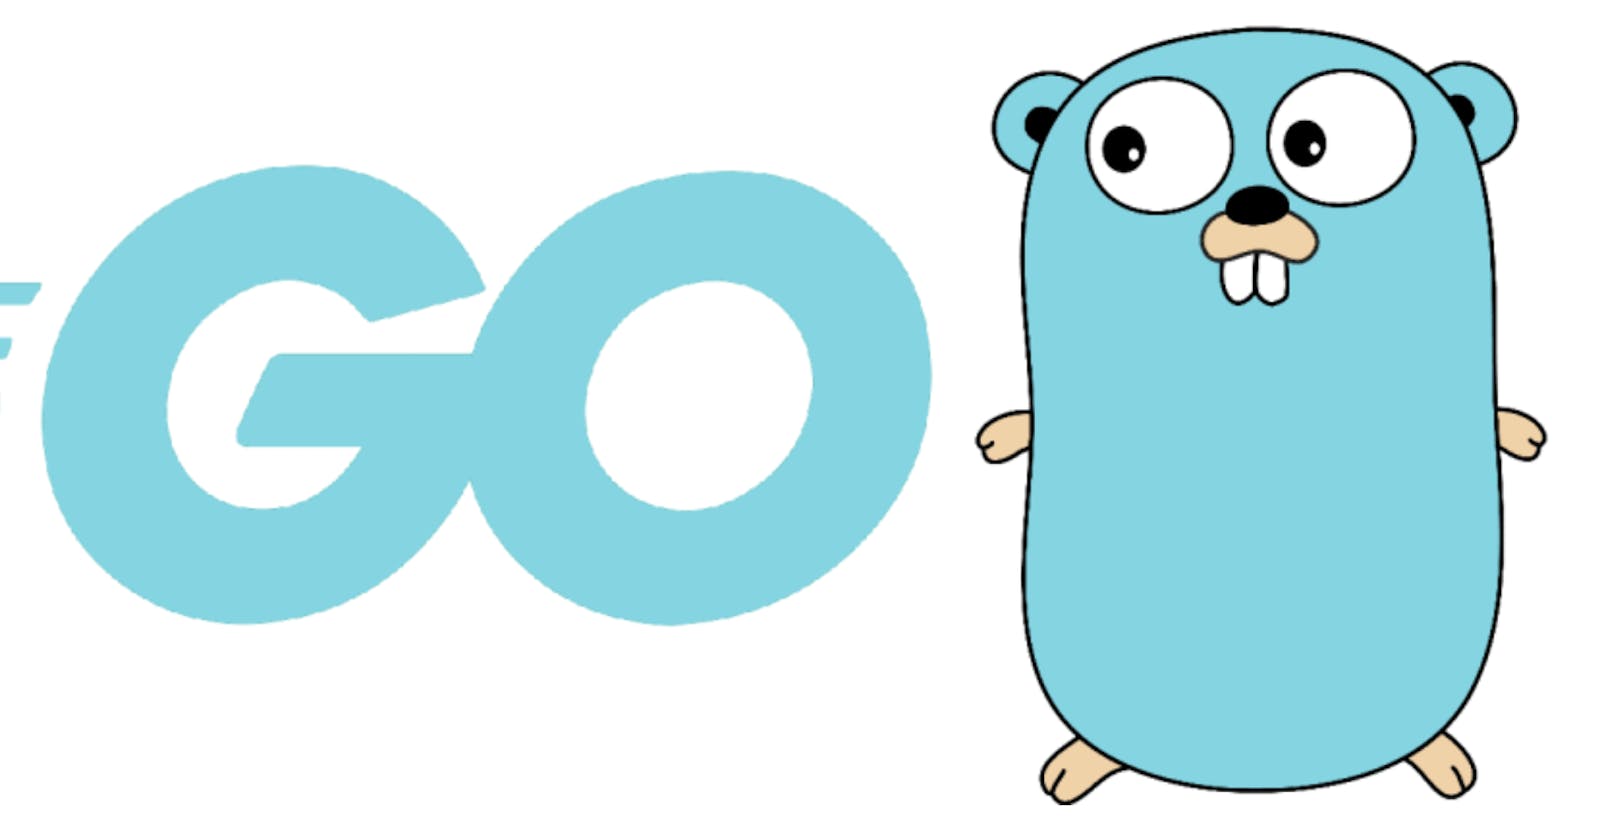 Test Automation with Golang